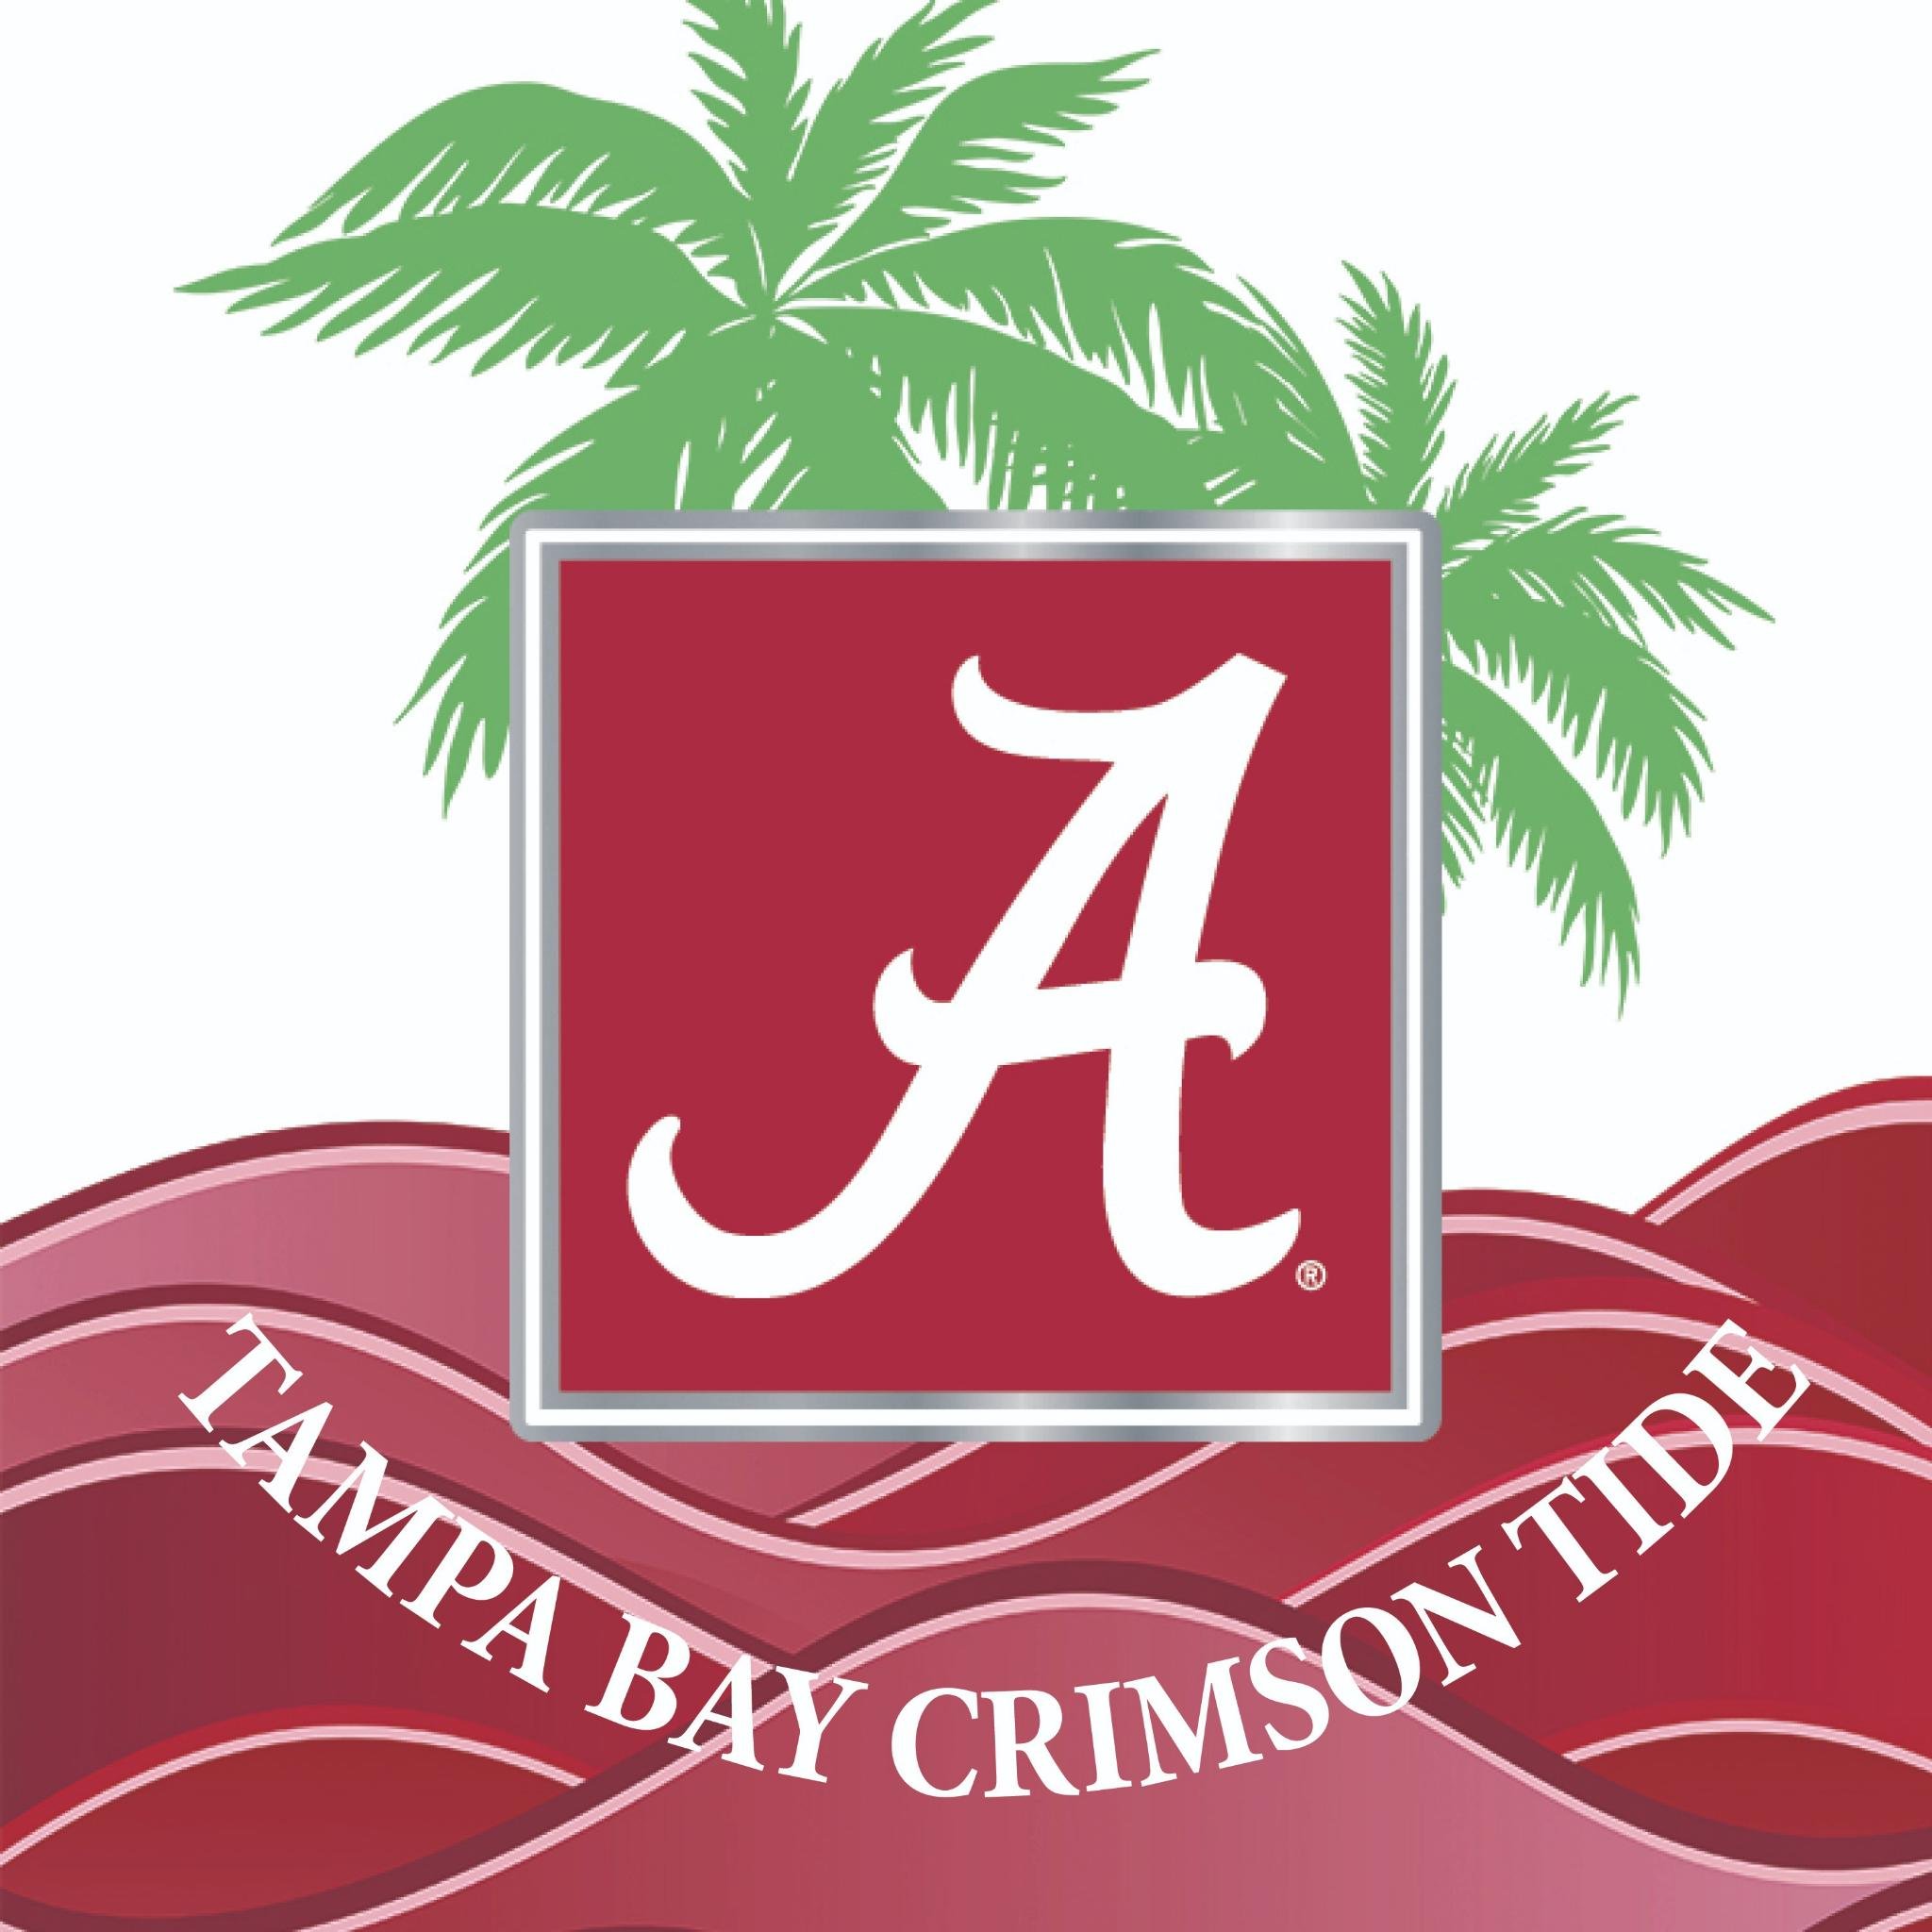 Tampa Bay Crimson Tide Events and Happenings! We welcome University of Alabama fans, alums and friends. A member of the National Alumni Association.